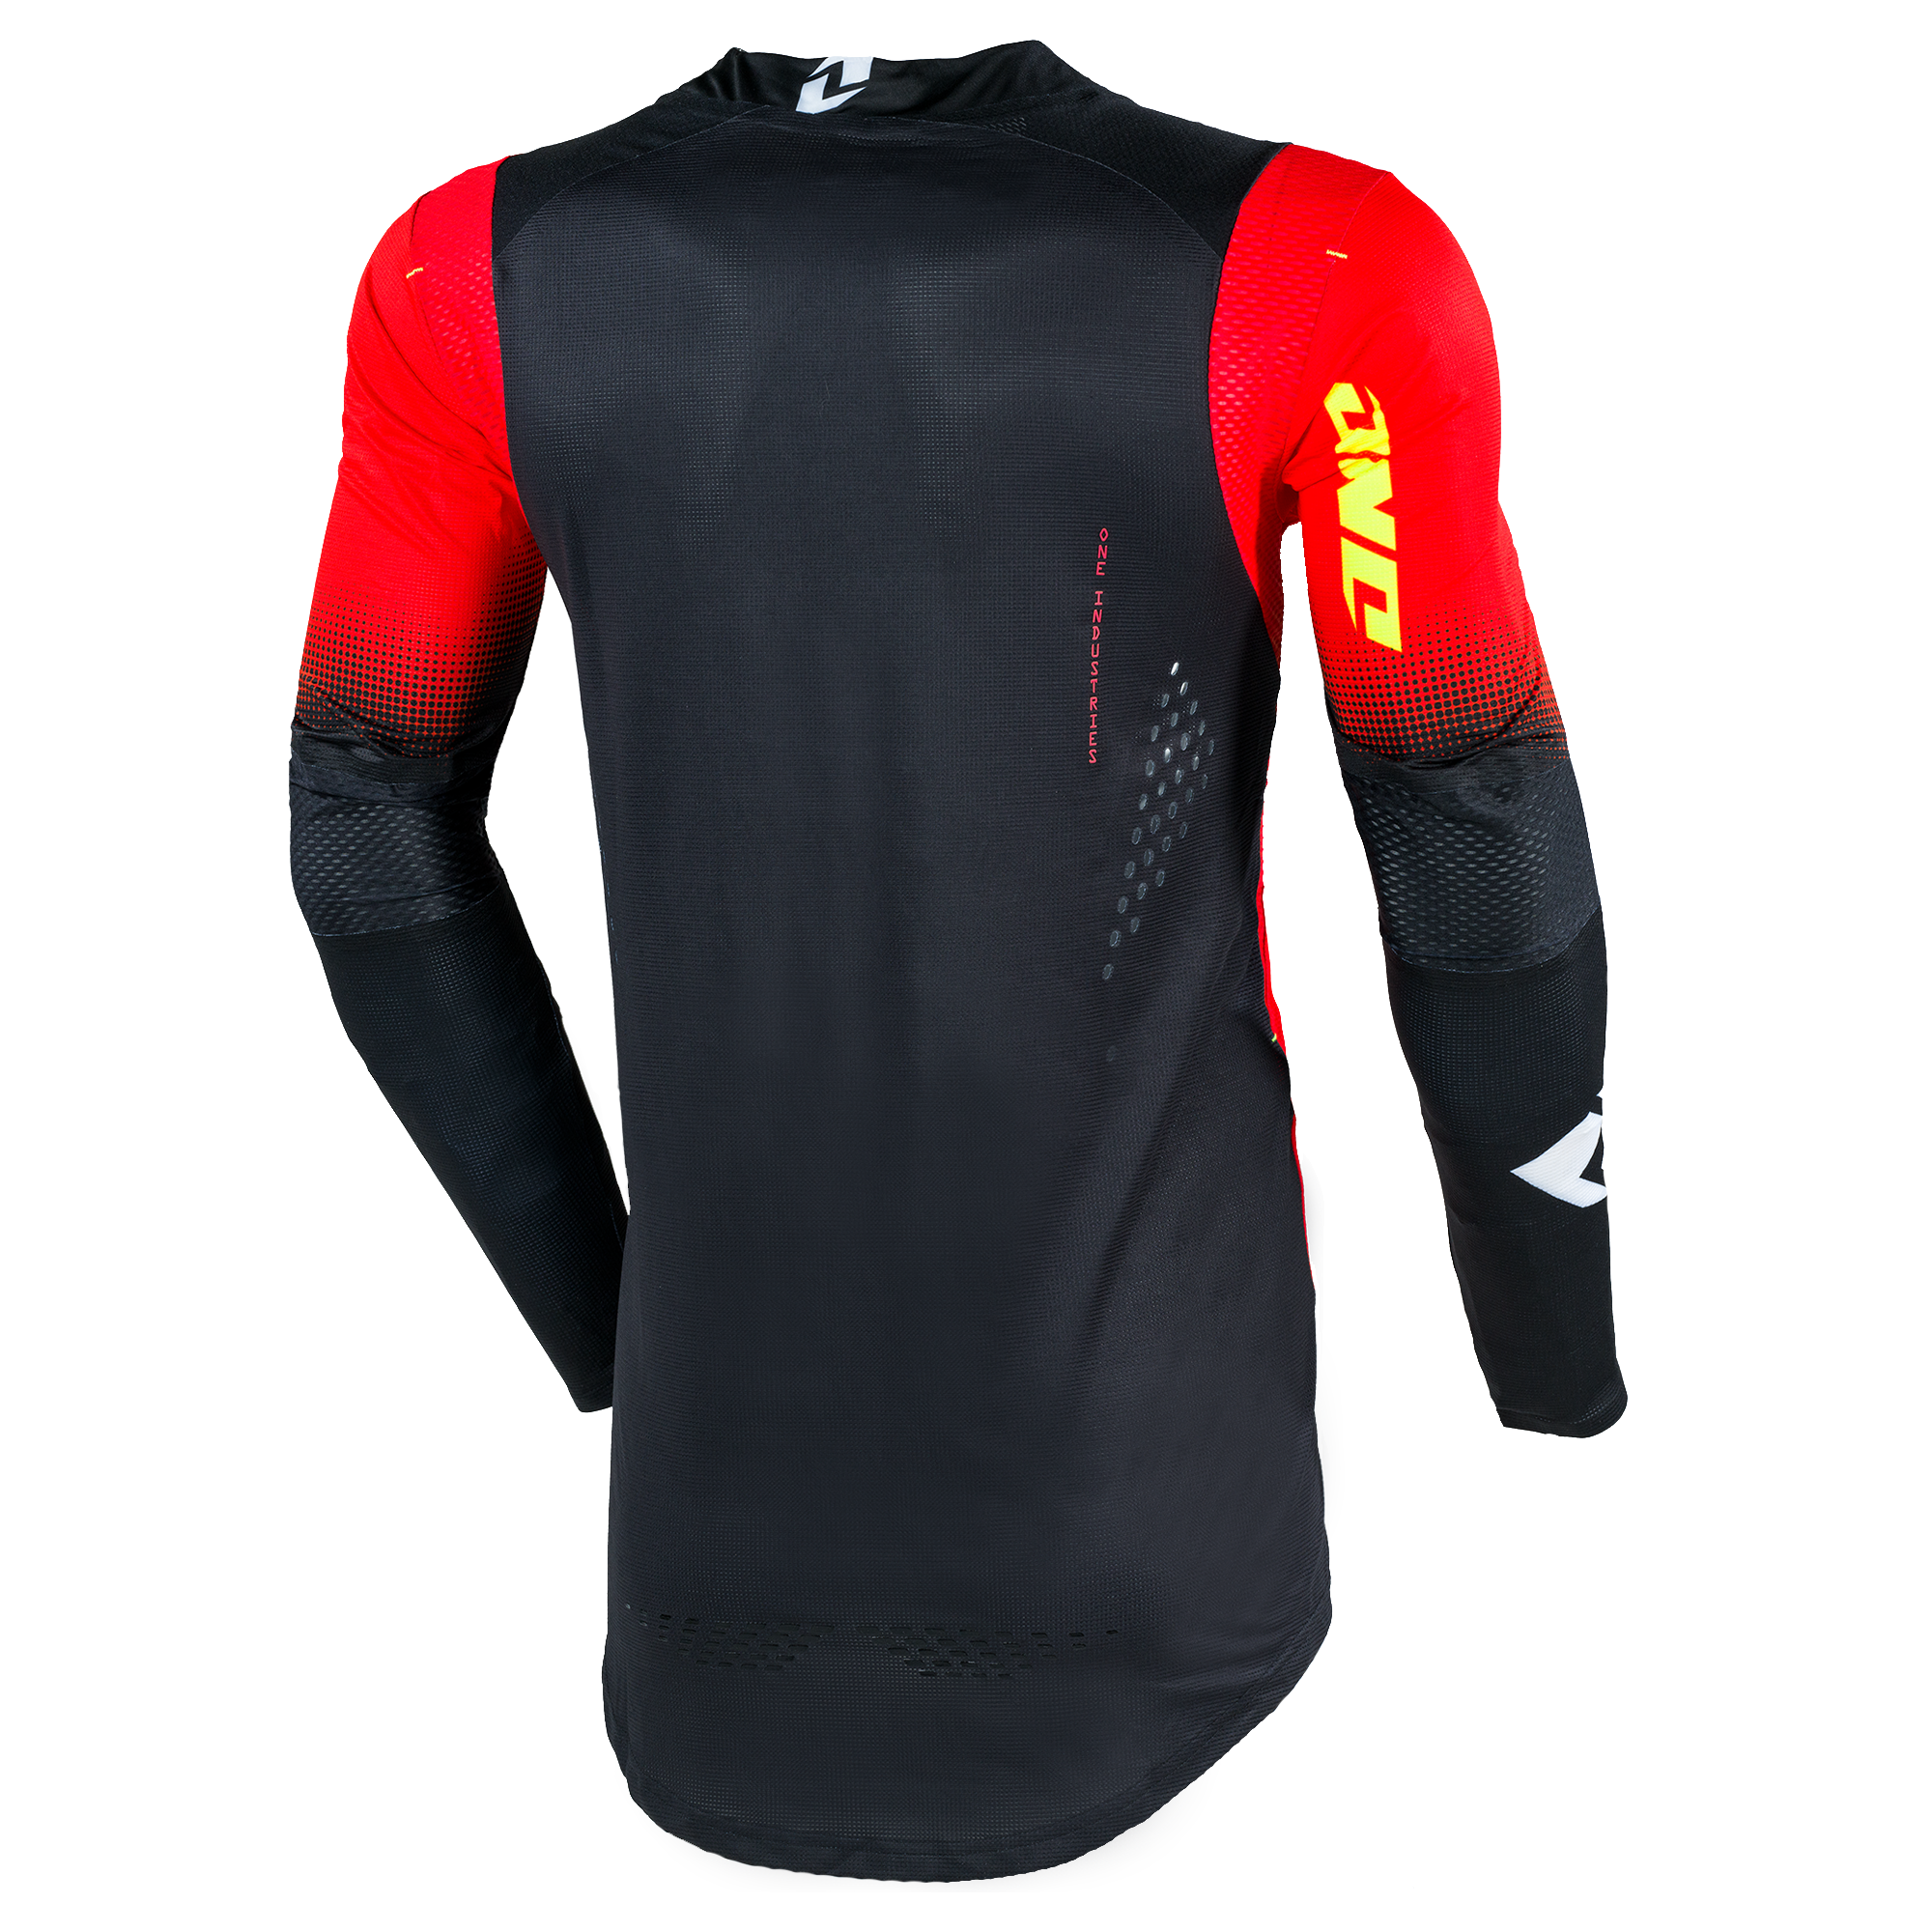 X-197 Youth Jersey - SCORCH RED